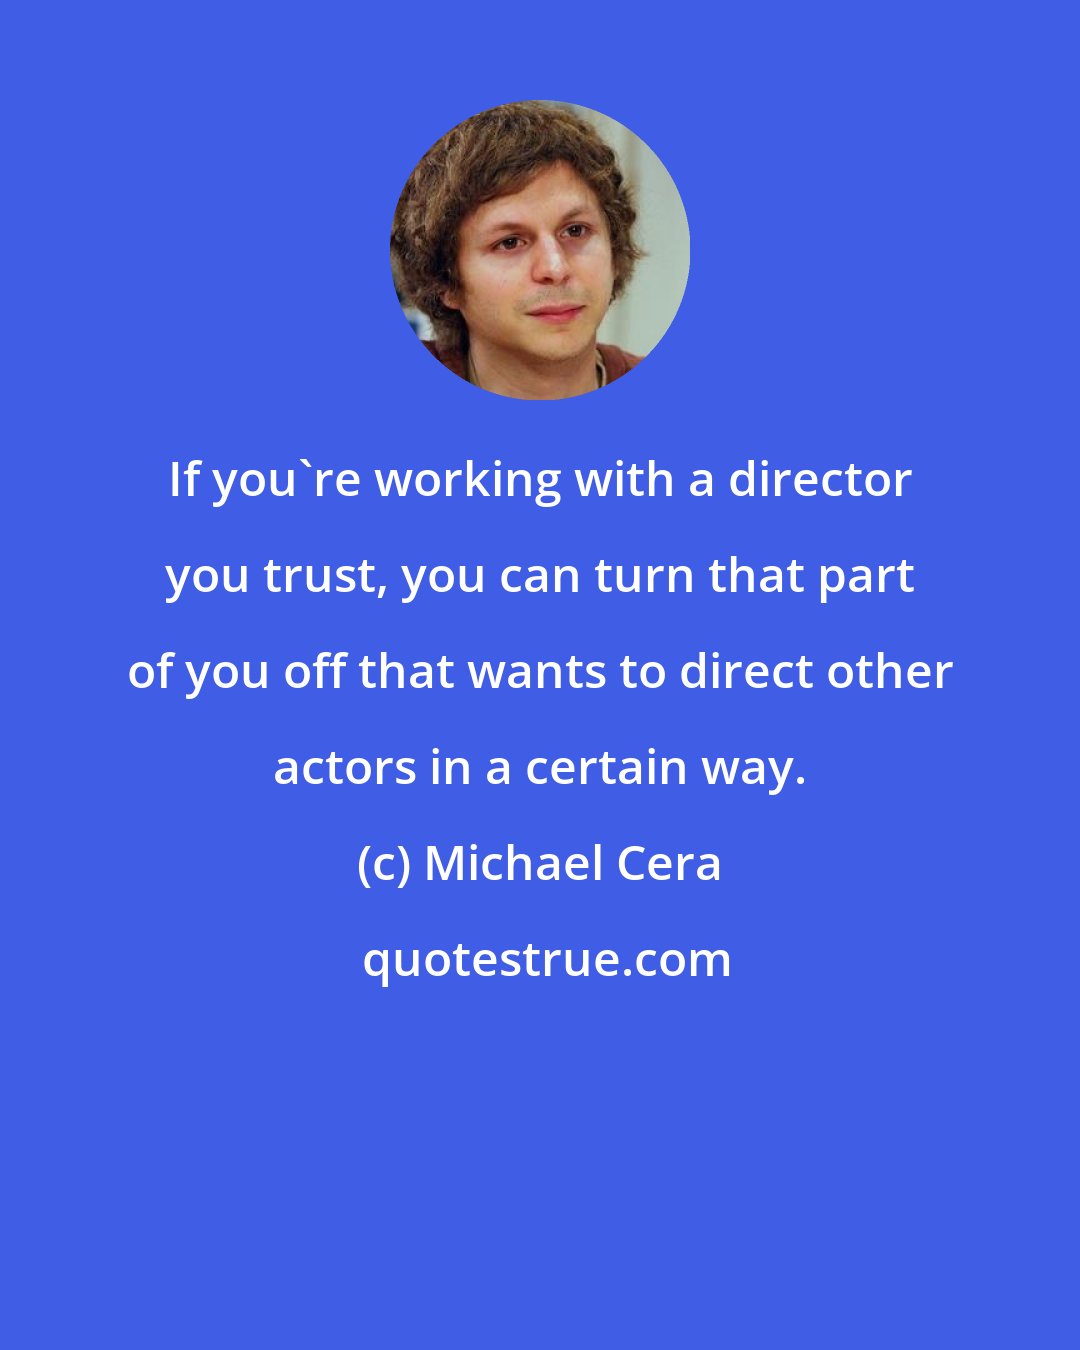 Michael Cera: If you're working with a director you trust, you can turn that part of you off that wants to direct other actors in a certain way.